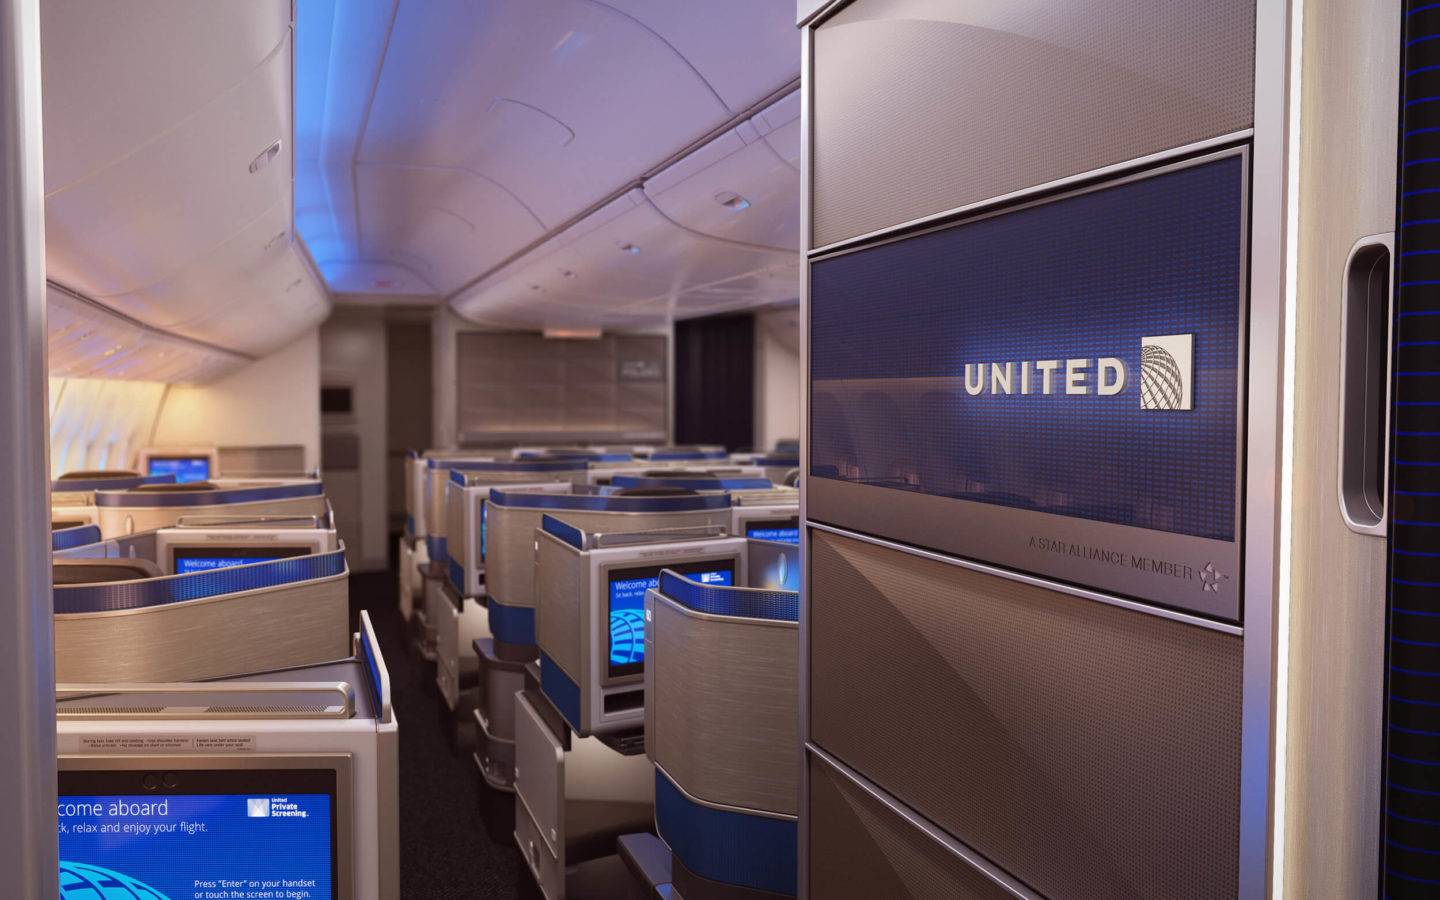 United brand panel at the entrance to the aircraft cabin